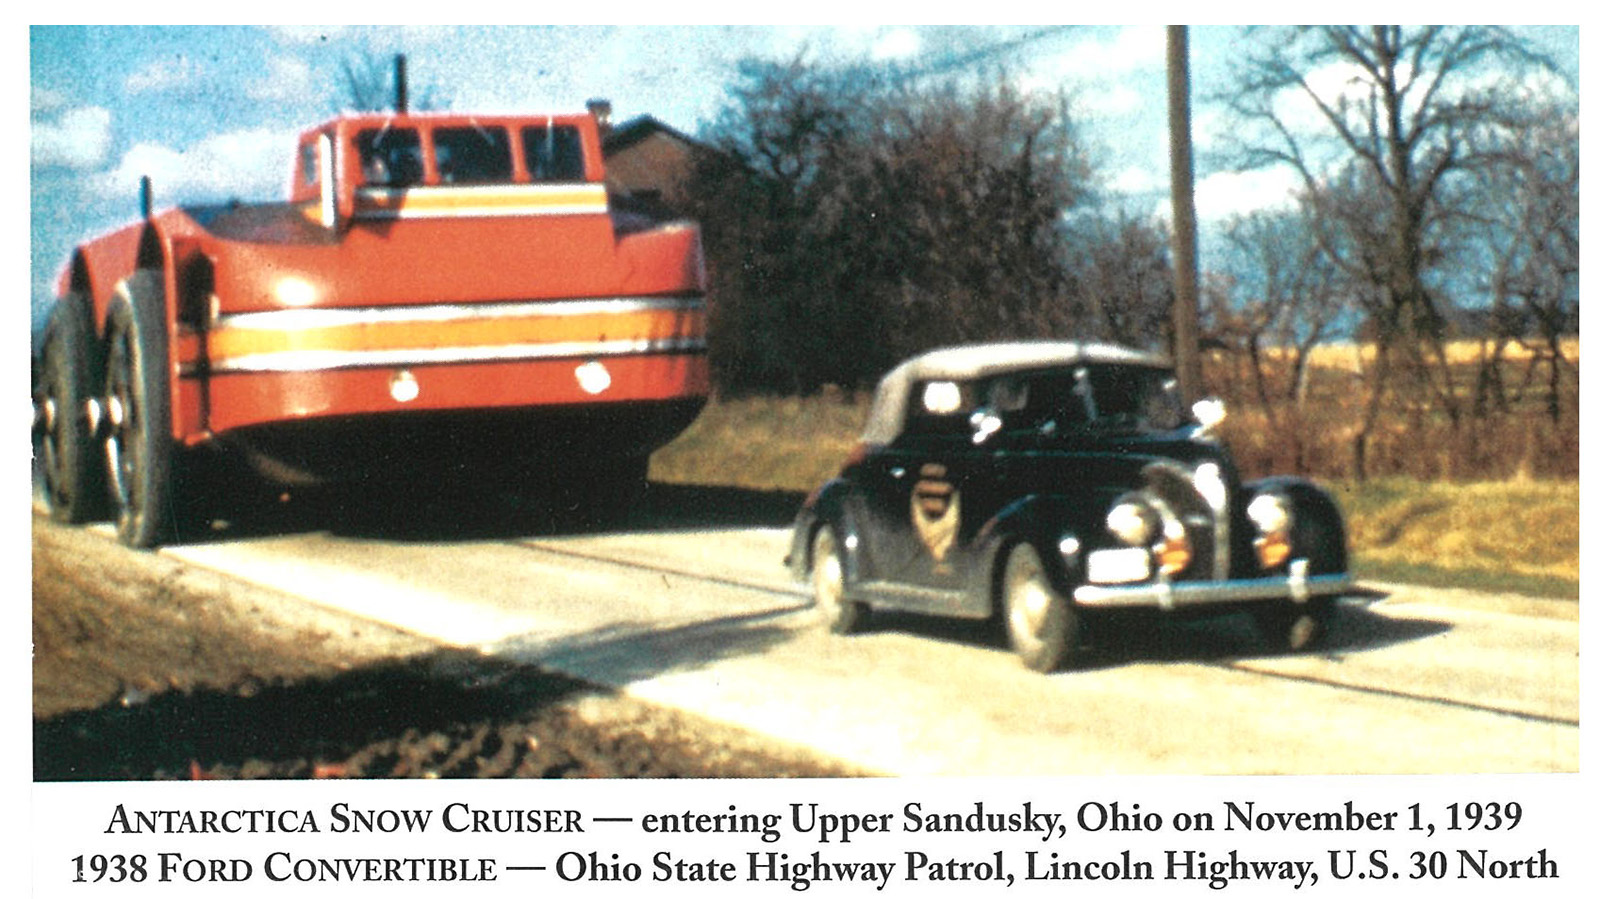 Antarctica Snow Cruiser entering Upper Sandusky, Ohio on November 1, 1939 with Ohio State Highway Patrol car, a 1938 Ford Convertible